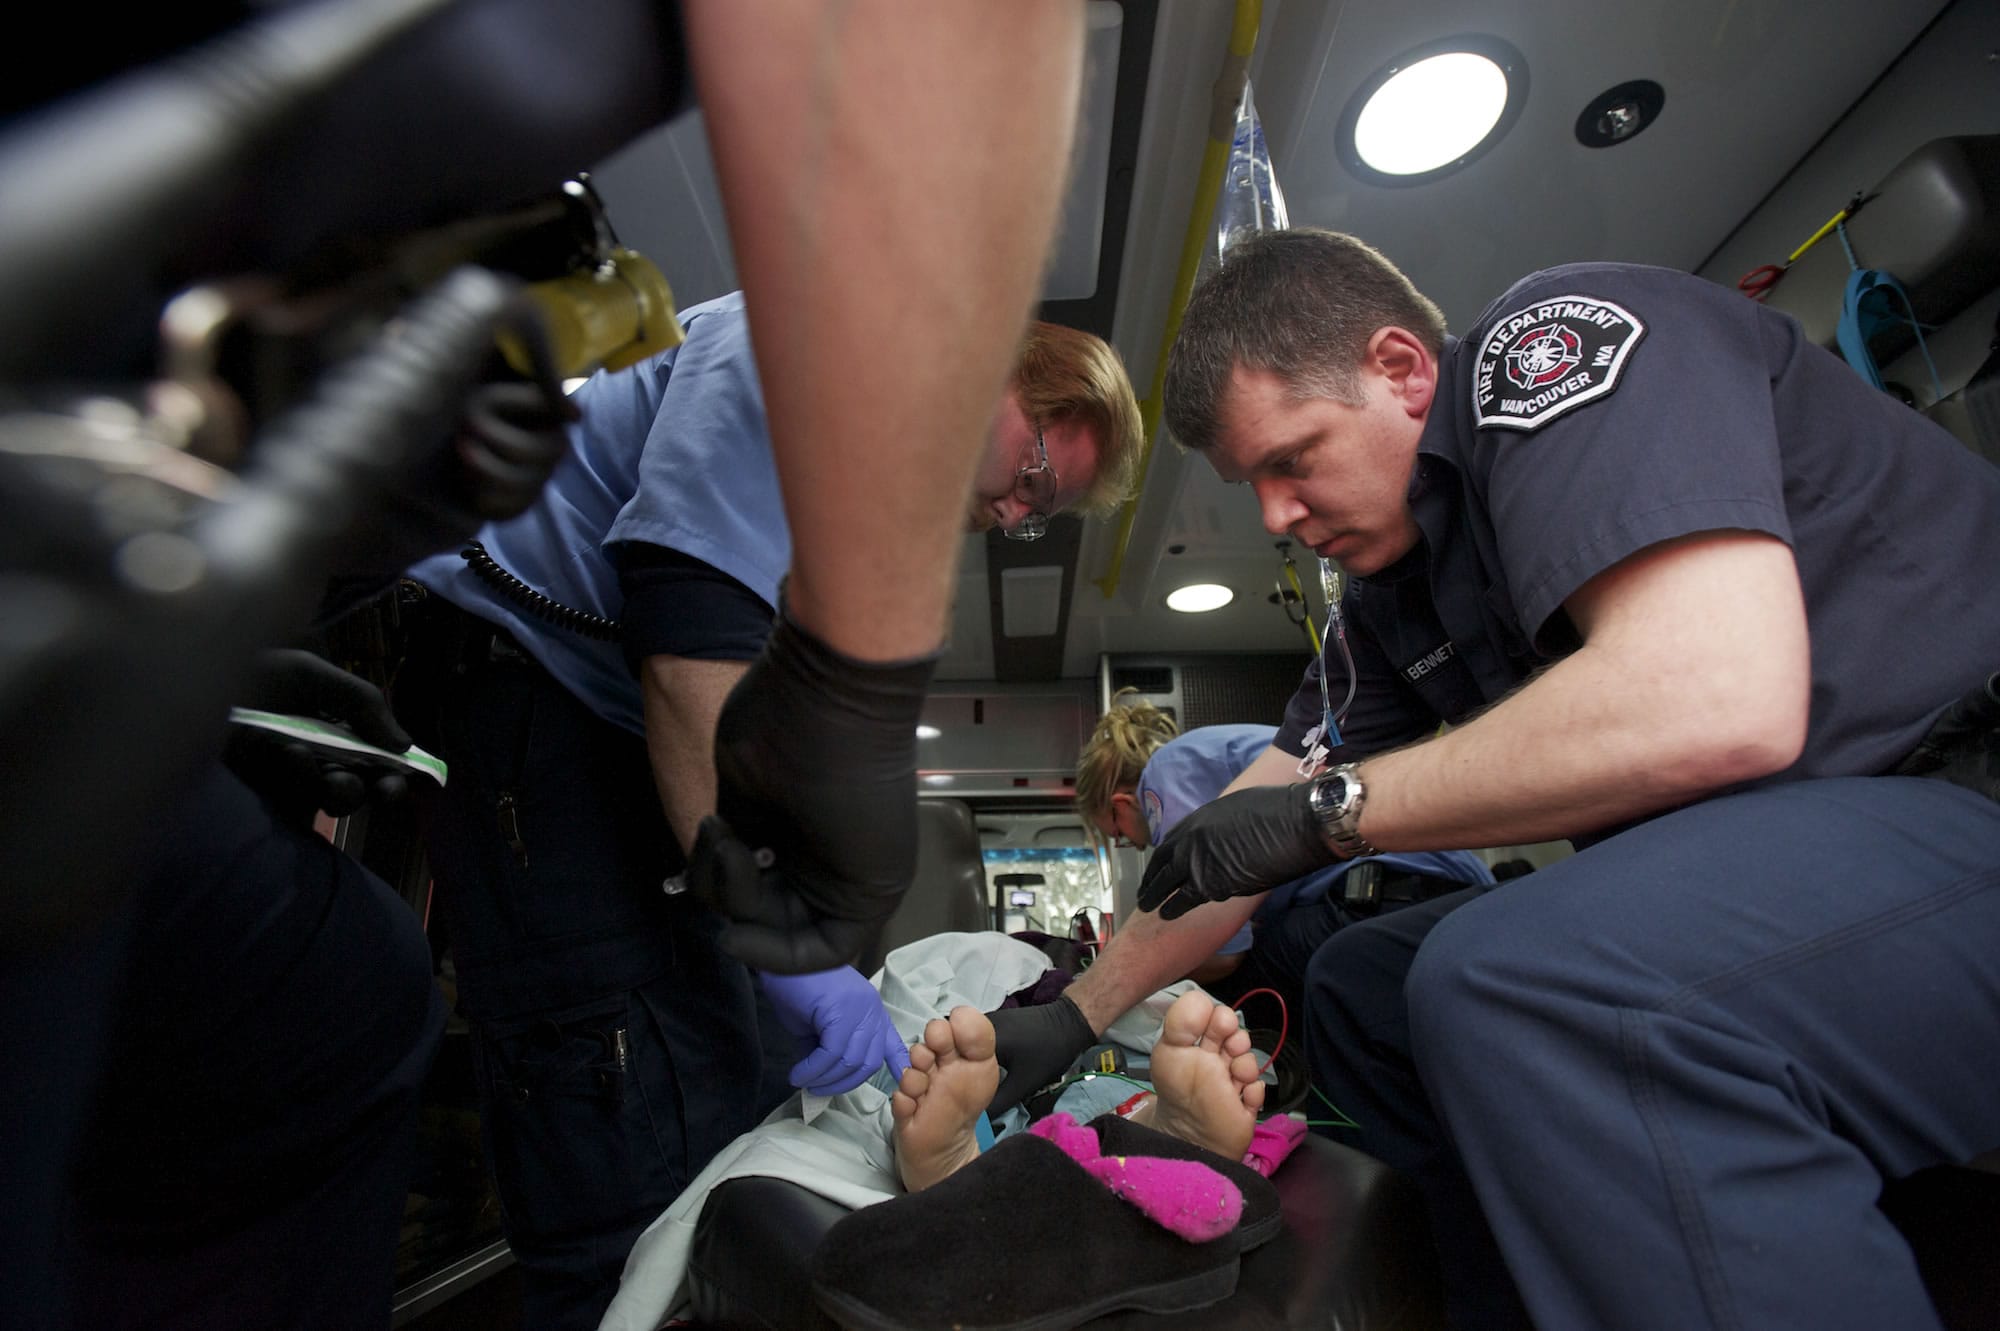 Vancouver firefighter-paramedic Mark Bennett, right, tries to find a usable vein on a female patient who collapsed March 1 during a cigarette break outside Lifeline Connections, where she was in treatment for heroin addiction.